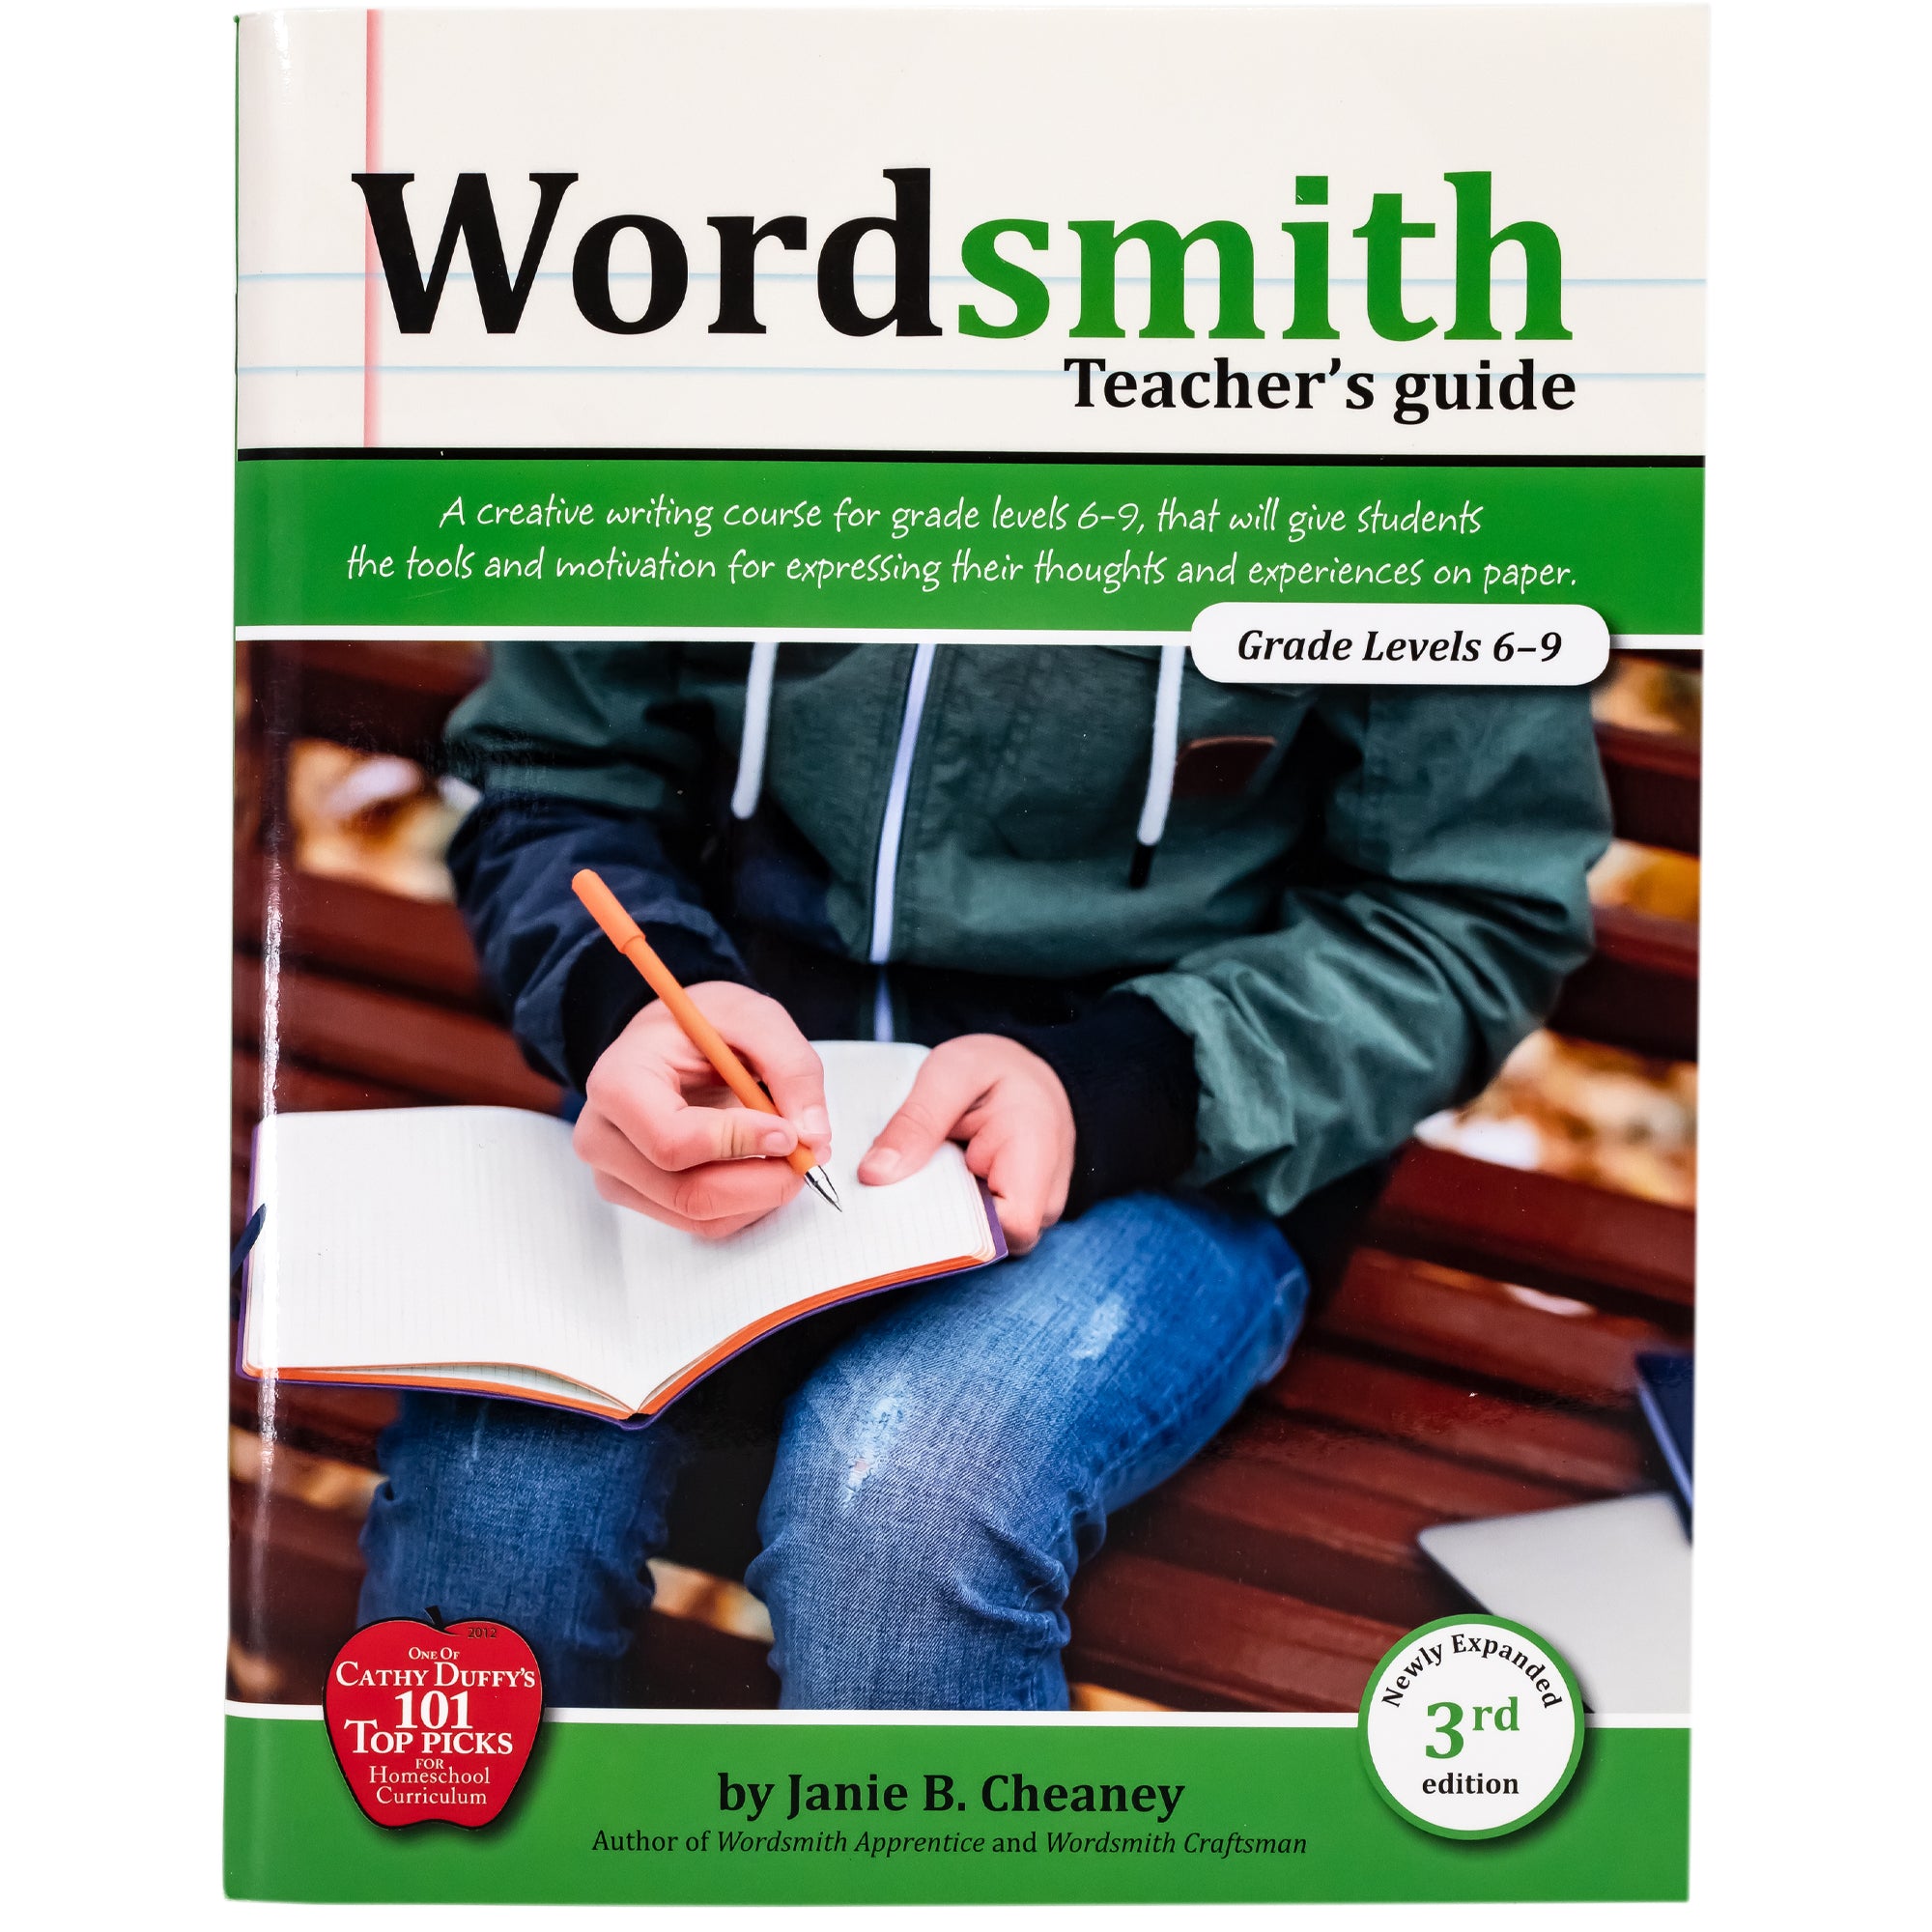 Wordsmith Teacher's Guide cover. The background shows notebook paper at the top and 2 green bands under. Between the green bands is a picture of a boy writing in a journal.